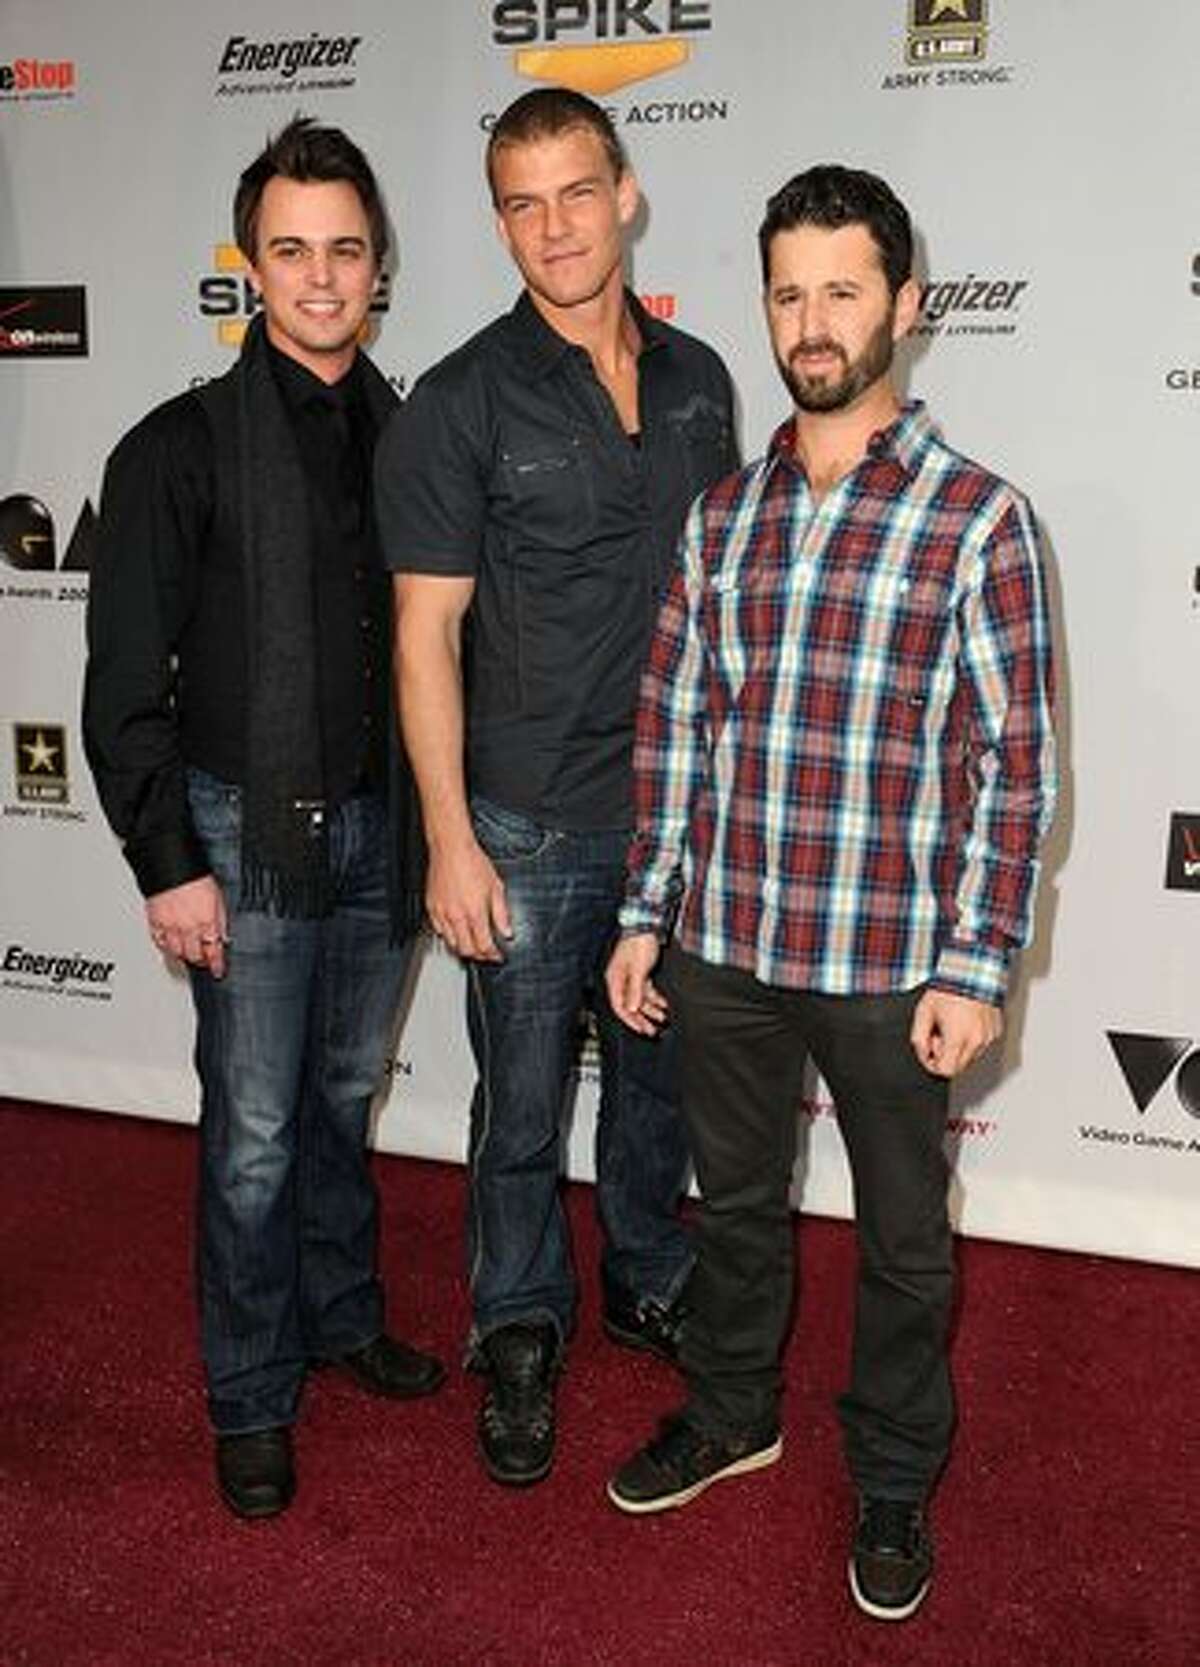 (L-R) Actors Darin Brooks, Alan Ritchson and Chris "Romanski" Romano arrive at Spike TV's 7th Annual Video Game Awards at the Nokia Event Deck at LA Live on December 12, 2009 in Los Angeles, California.